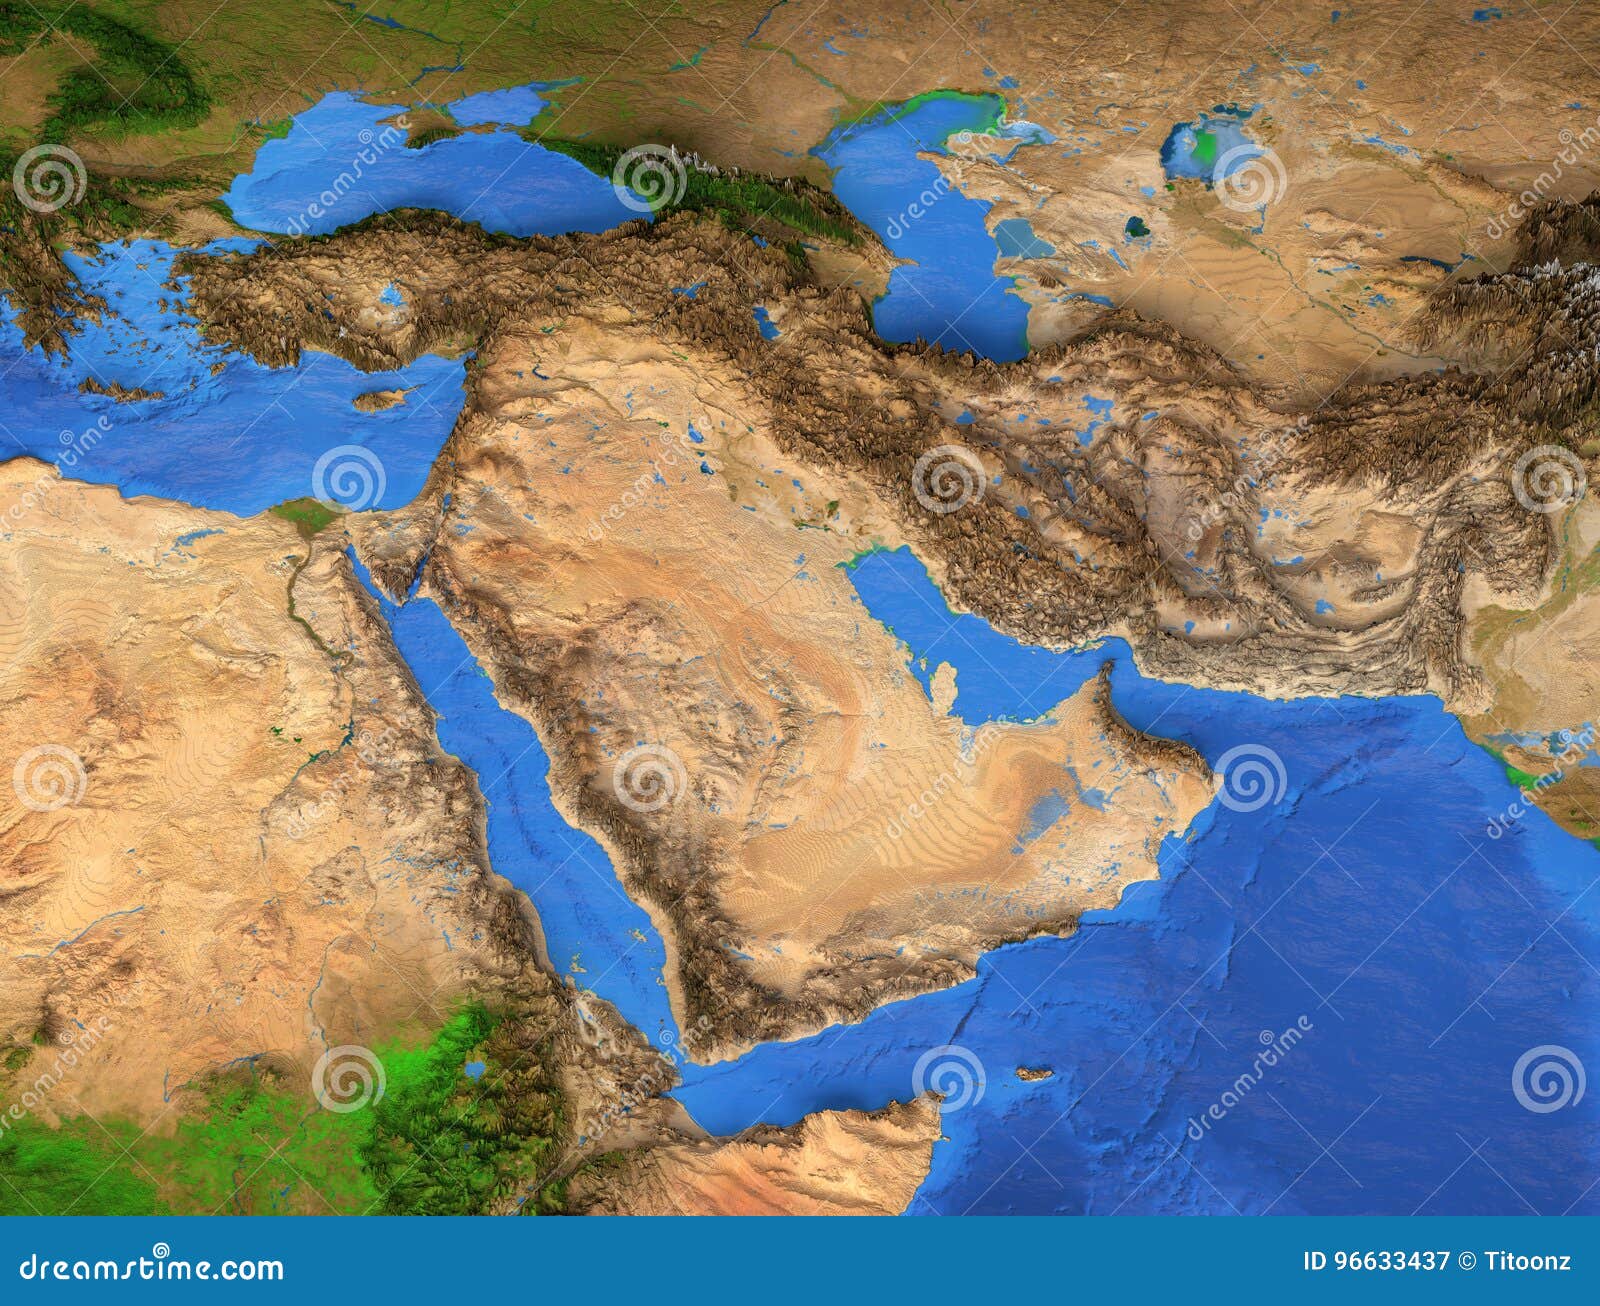 middle east - high resolution map